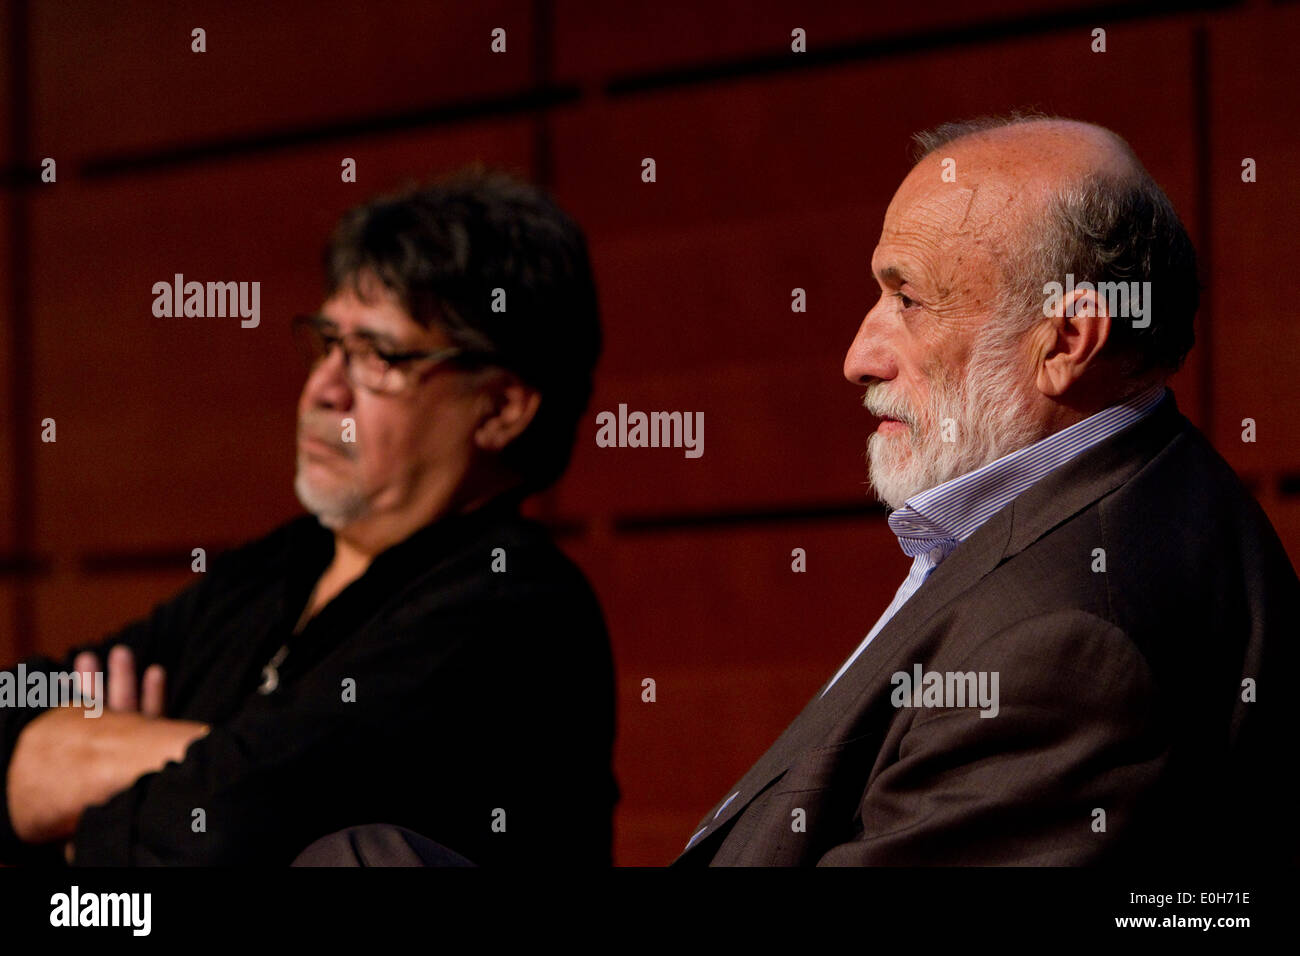 Slow Food movement founder Carlo Petrini (right) with Chilean writer Luis Sepulveda (left) during a book presentation Stock Photo